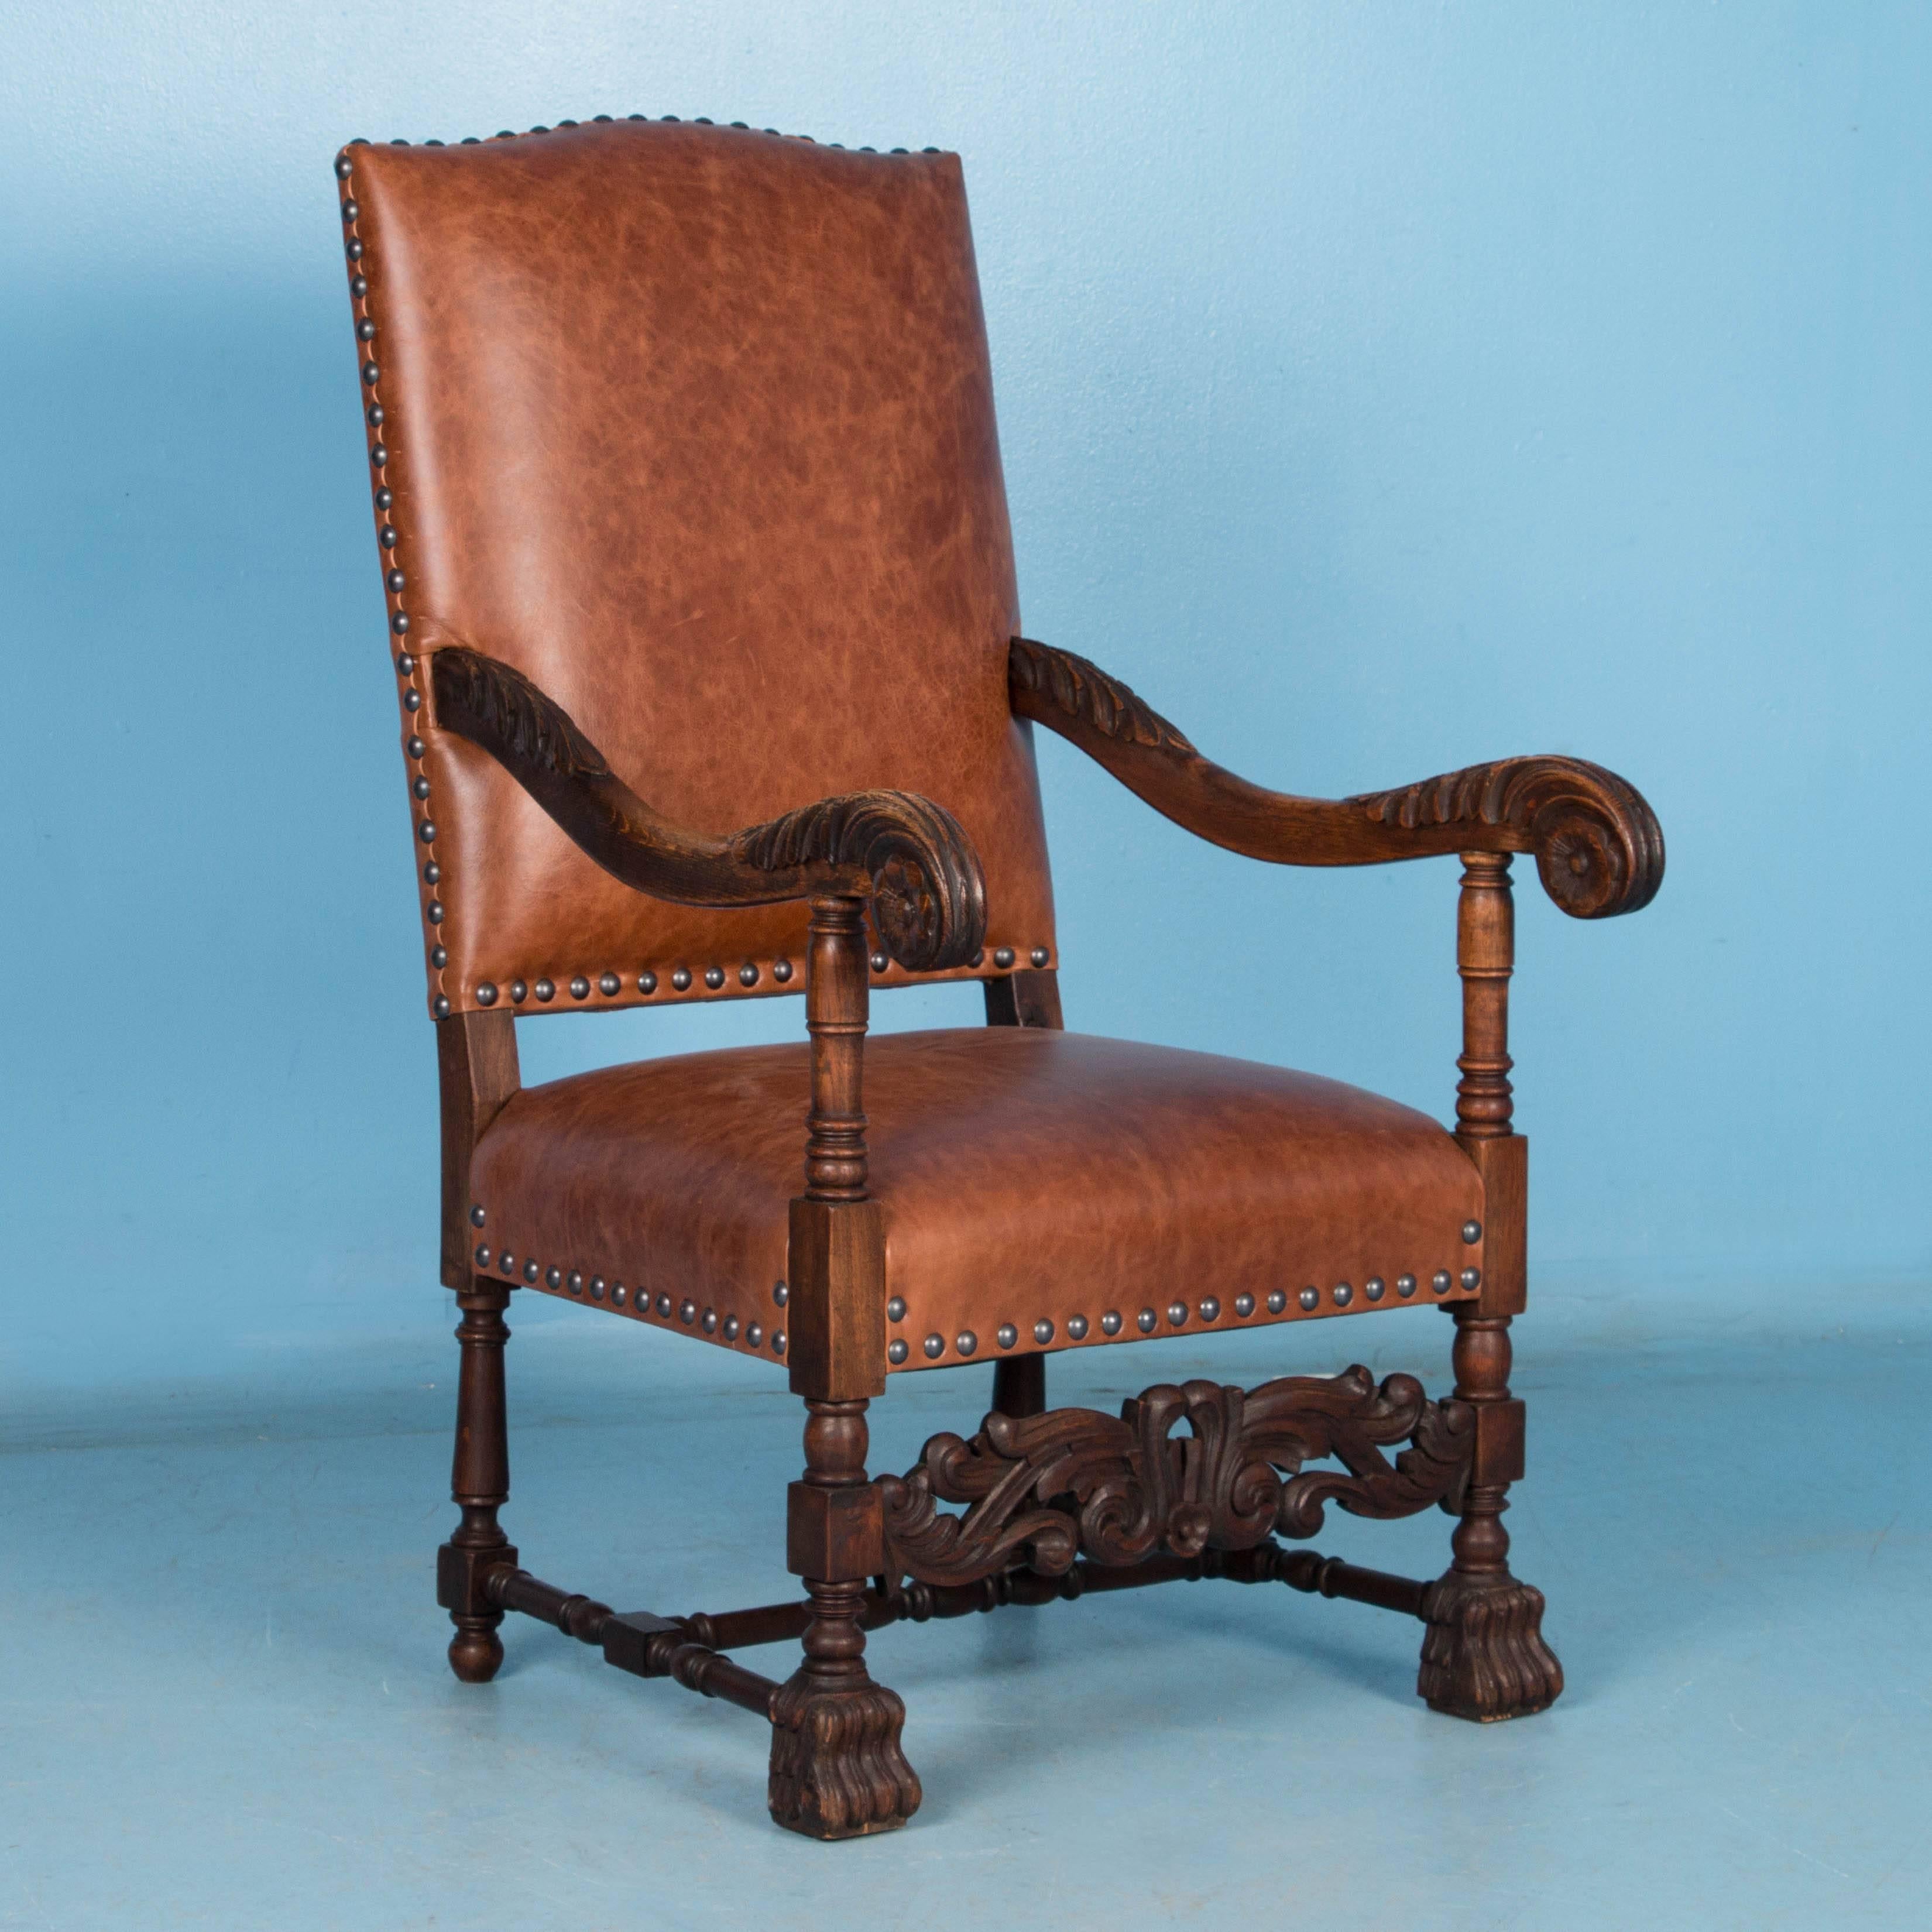 This pair of arm chairs are an exceptional find for a variety of reasons. The hand carved oak baroque style of the late 1800's creates a stately appeal that is timeless, especially the perfect curve of the arms. Yet it is the addition of new